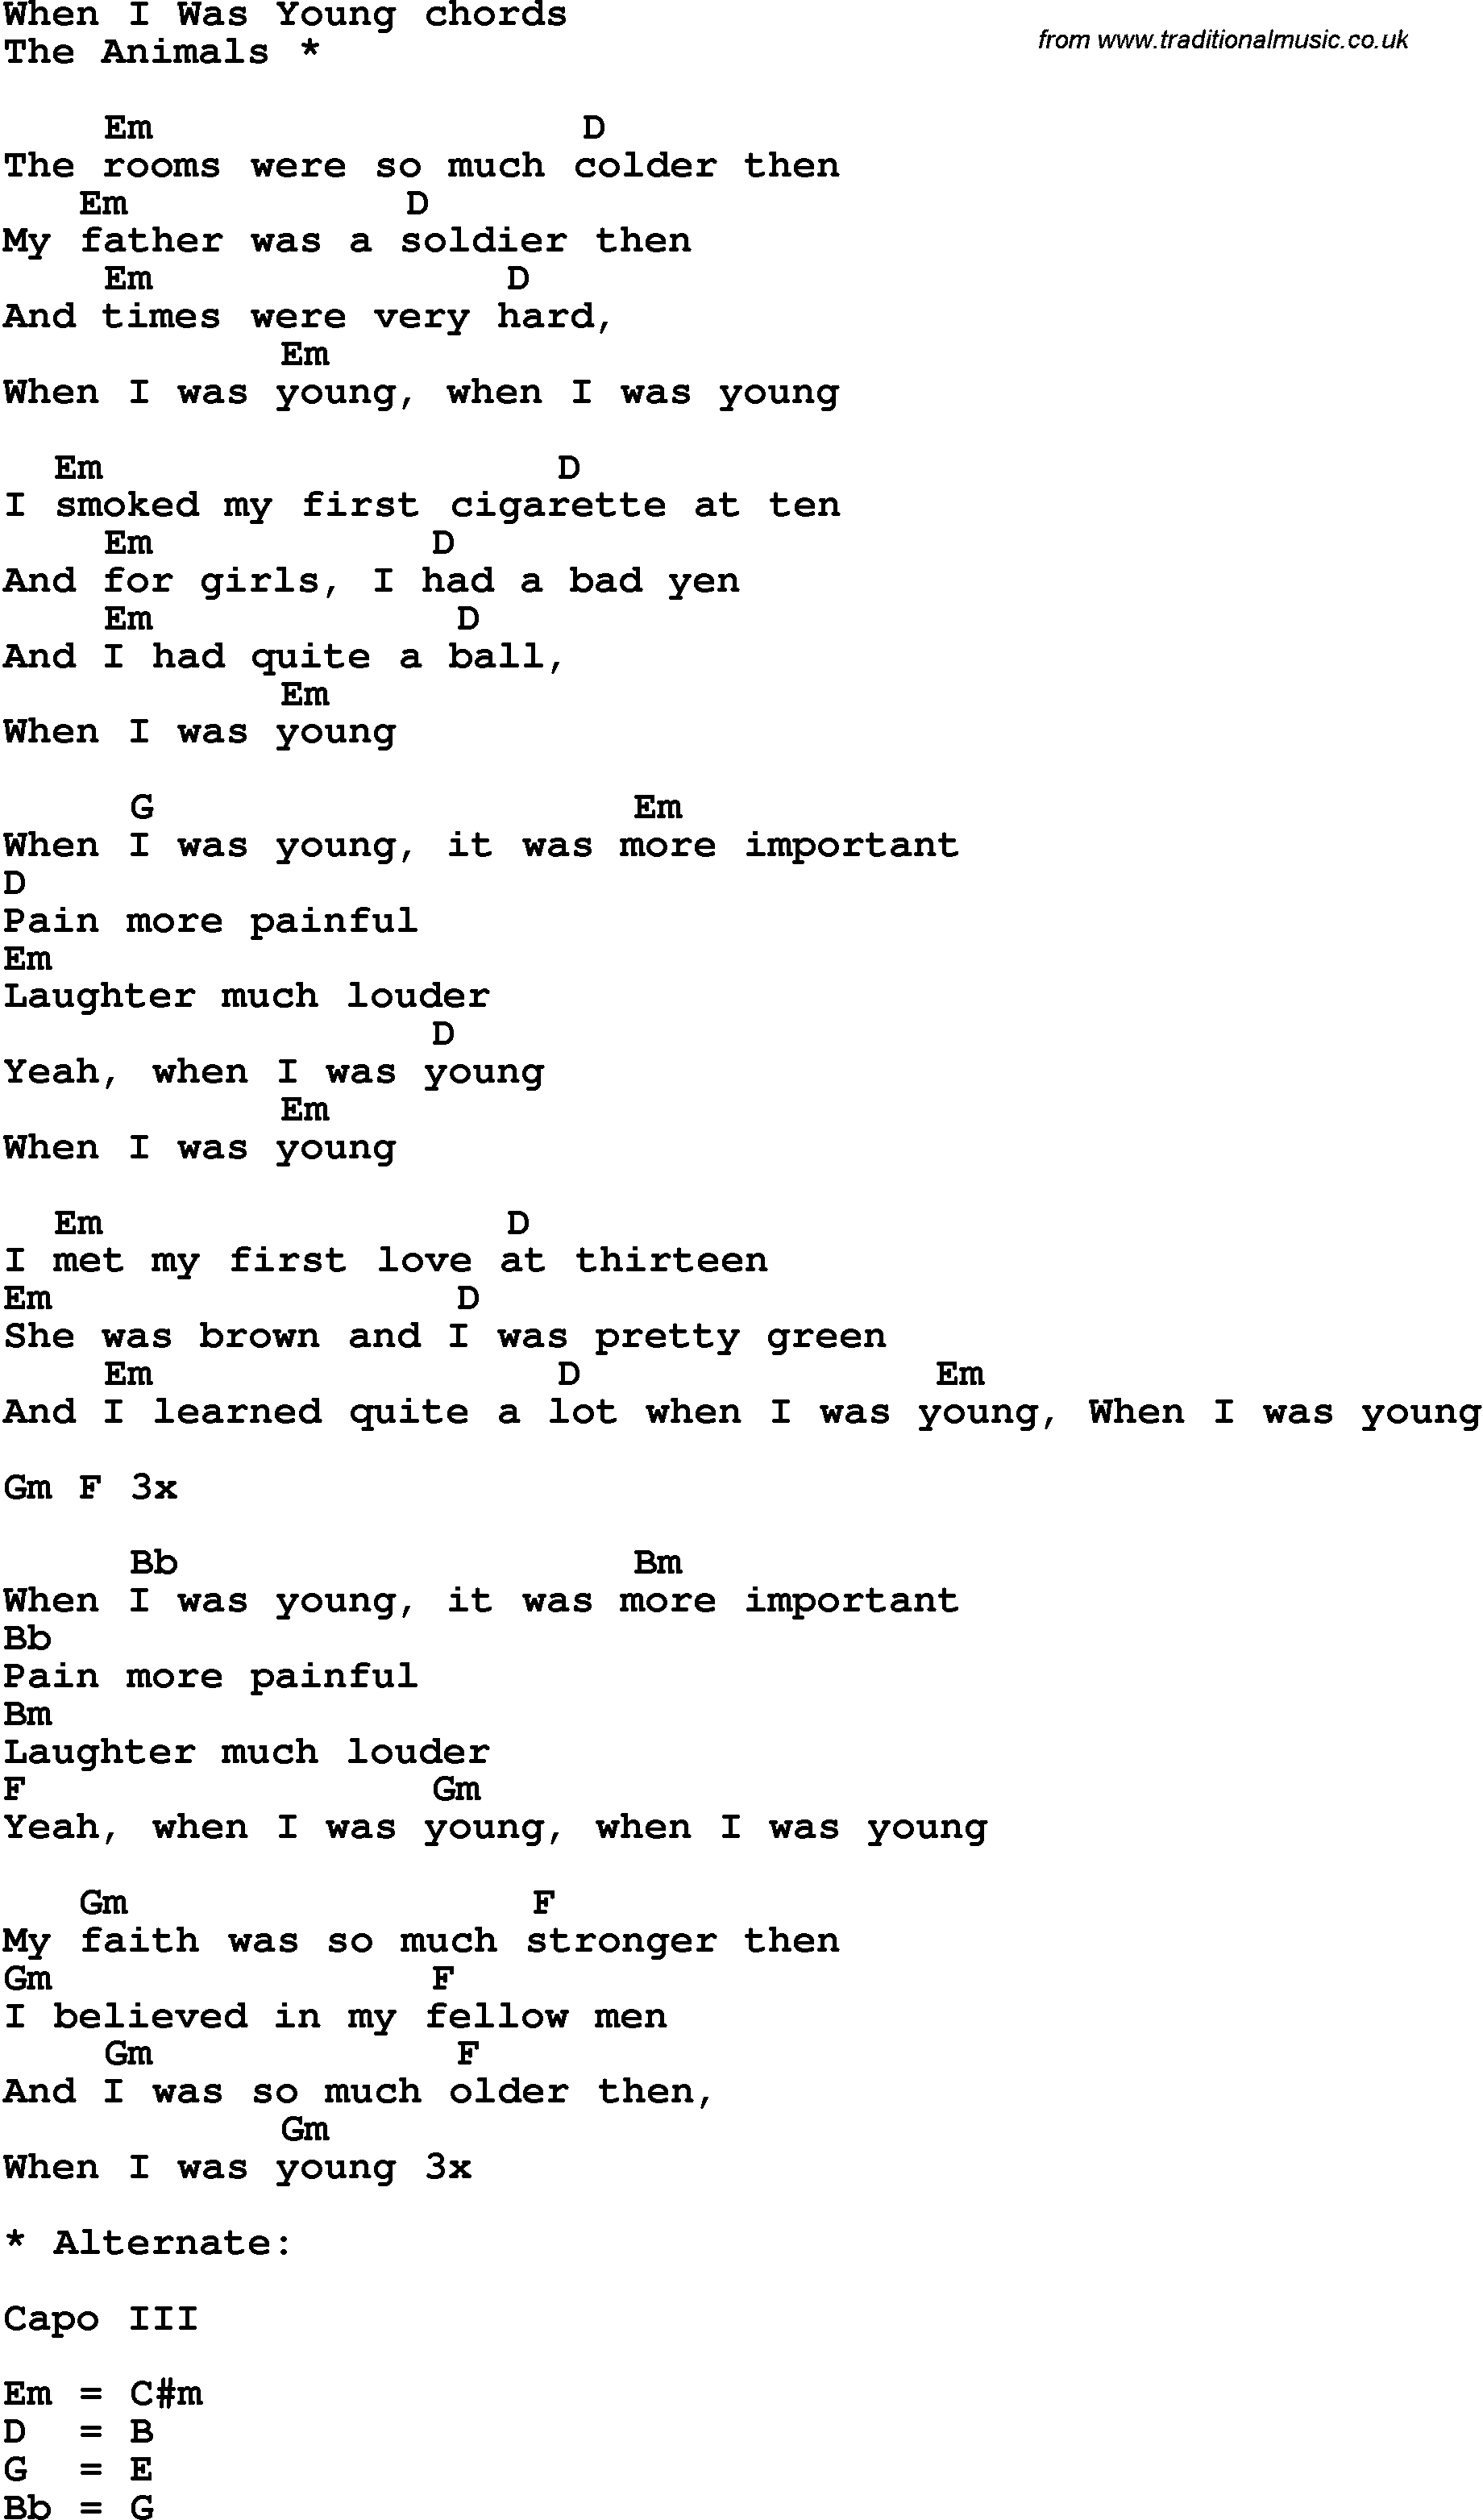 Song Lyrics with guitar chords for When I Was Young